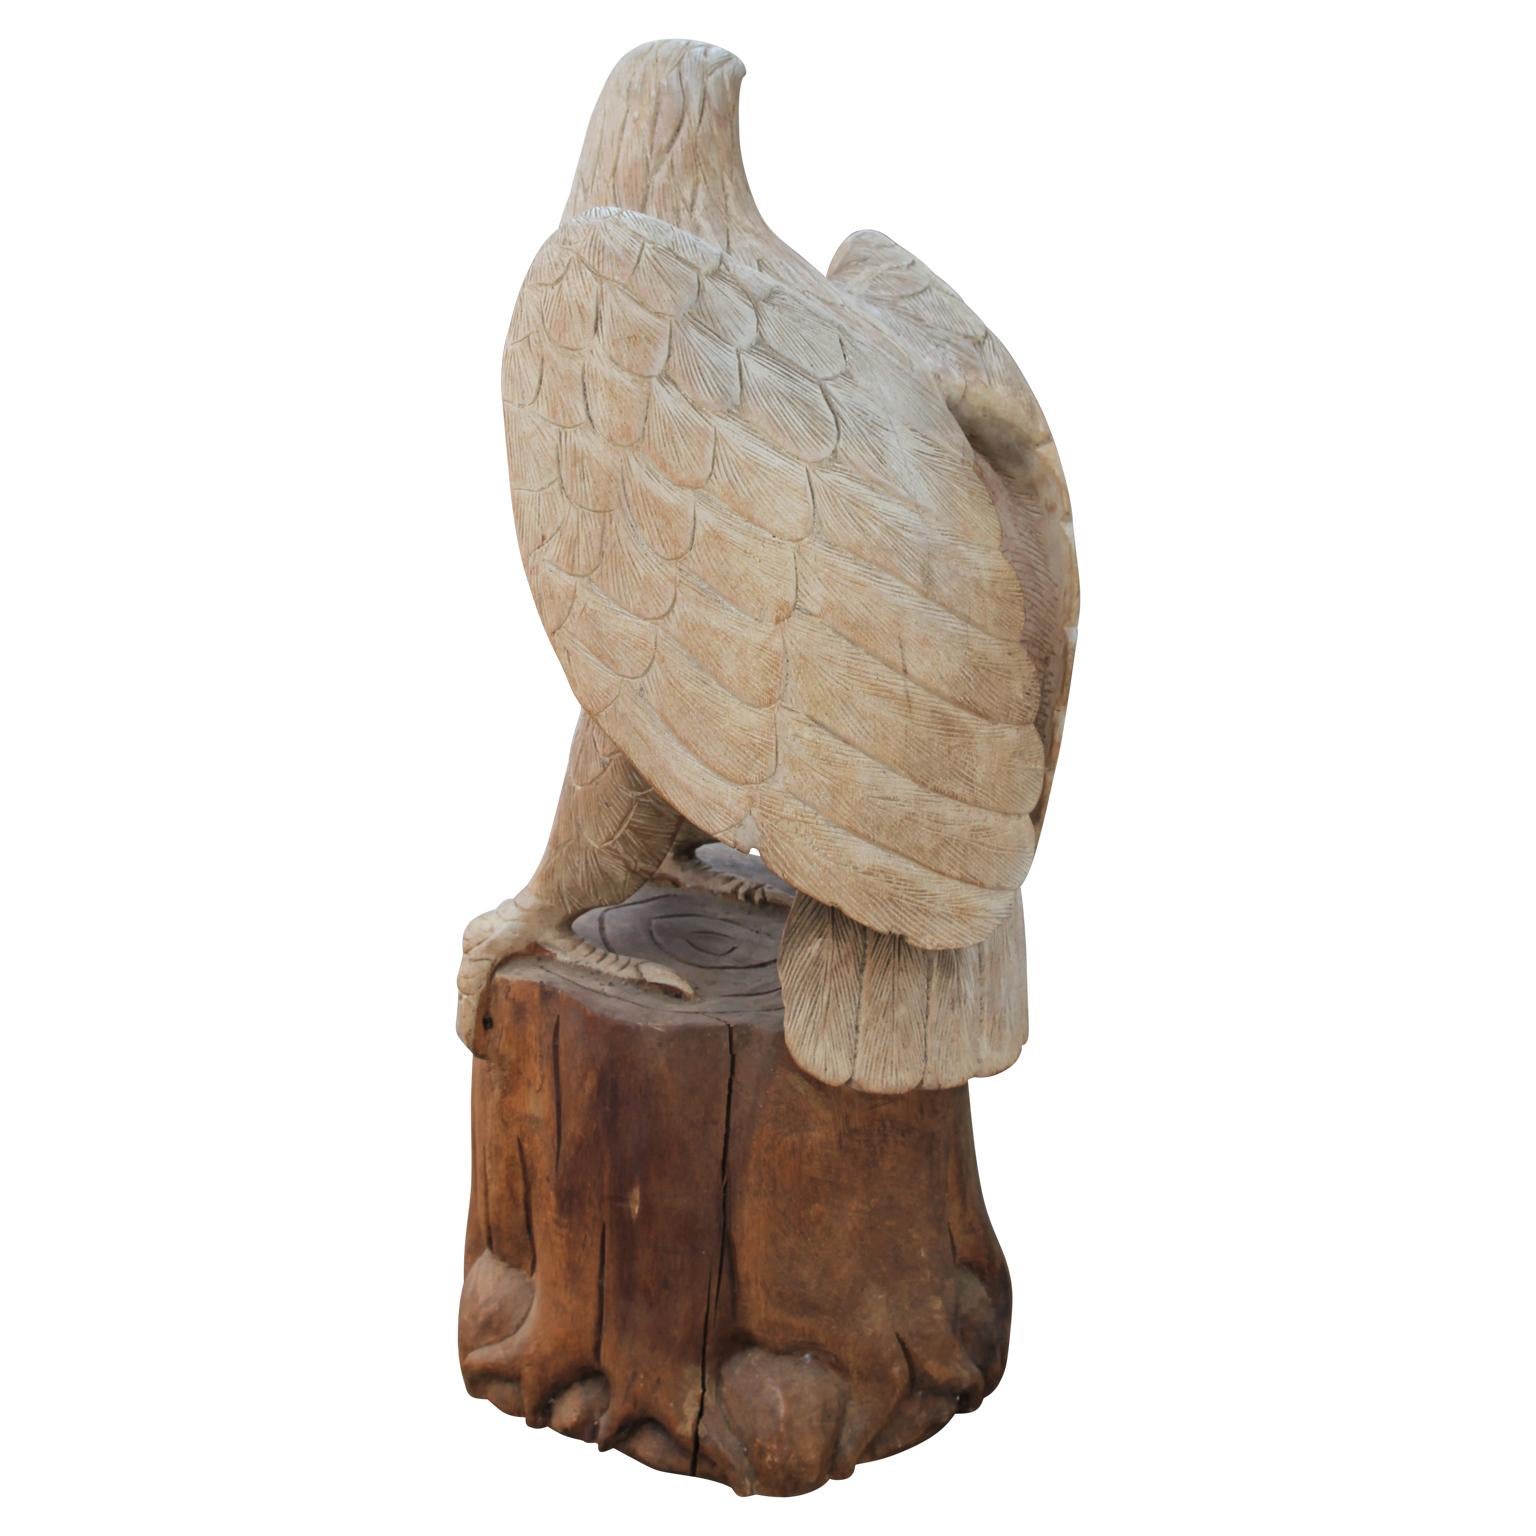 Hand carved statue of red-eyed eagle facing left and perched on a wooden log. The eagle's body has been brushed with white and the stump has been left a natural color. 